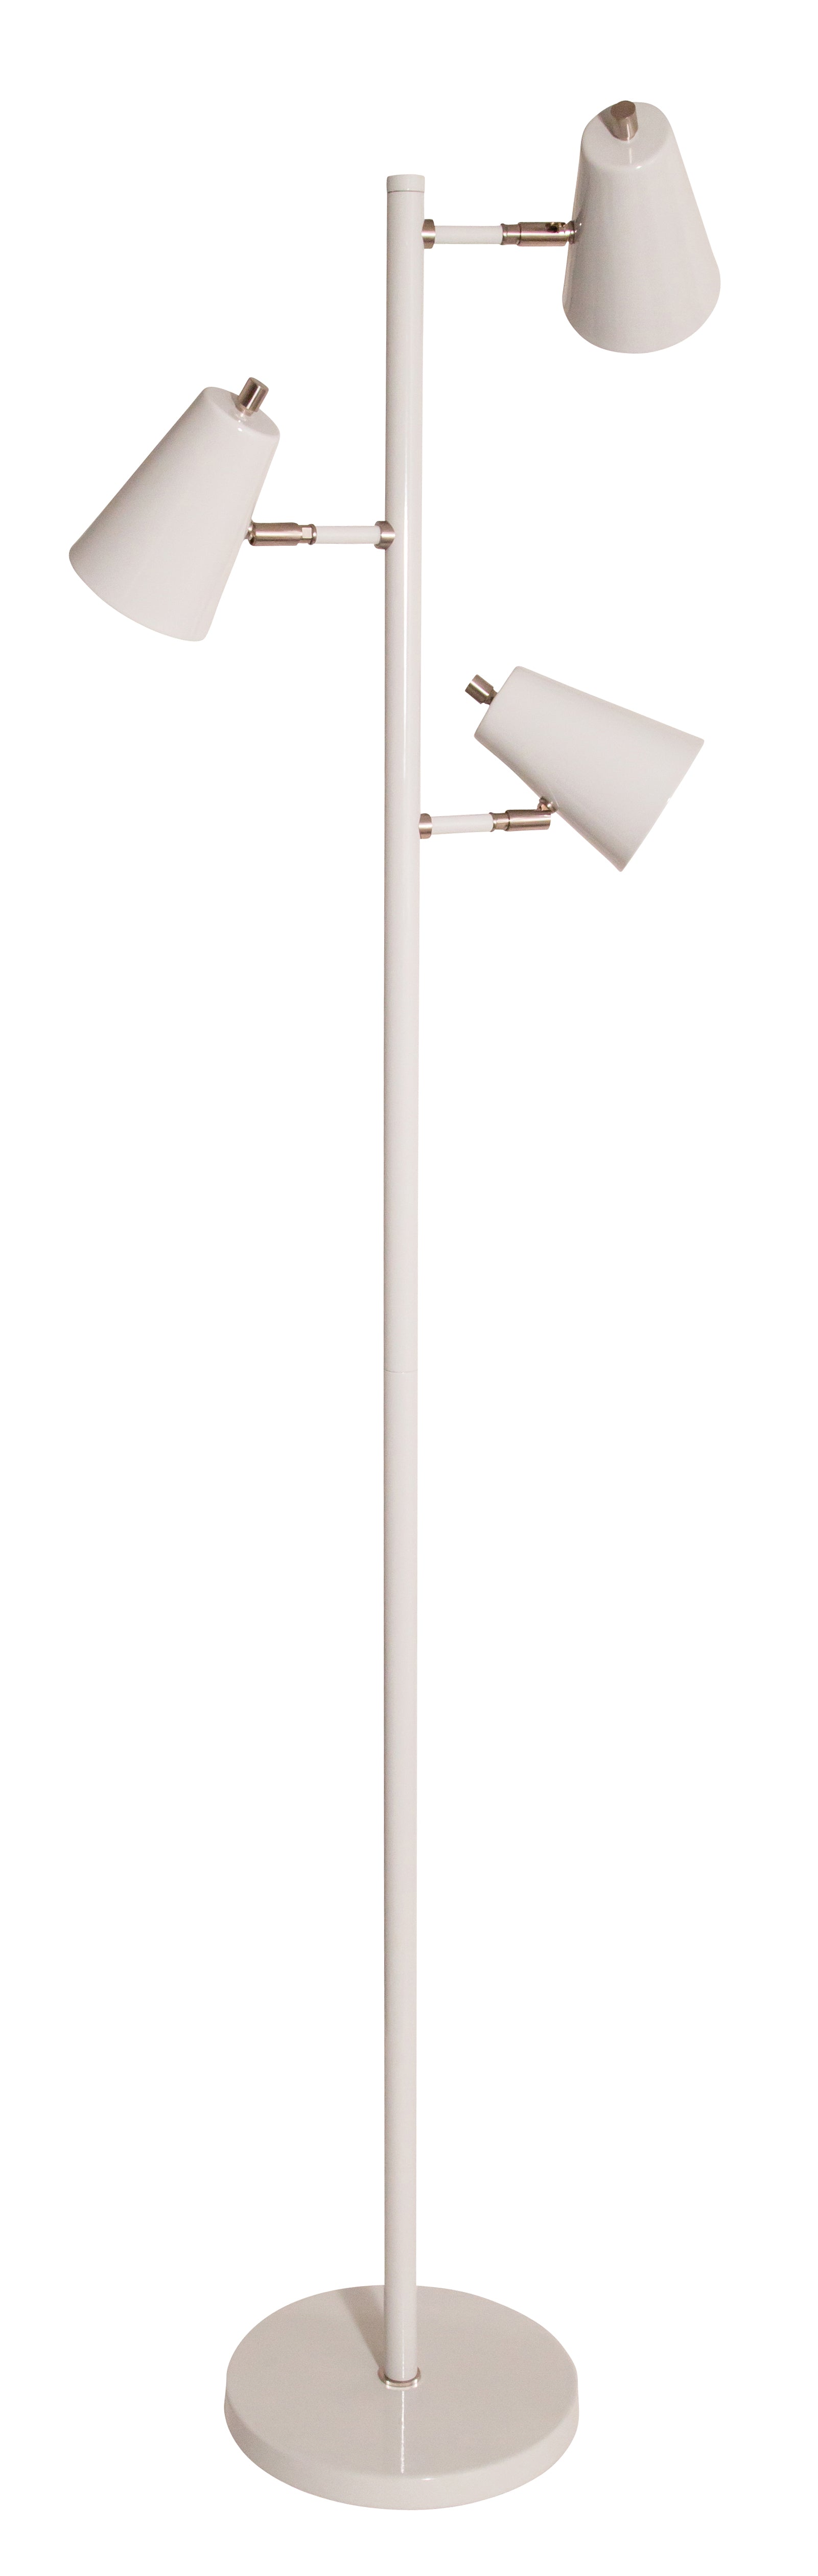 House of Troy Kirby LED three light floor lamp in gray with satin nickel accents K130-GR